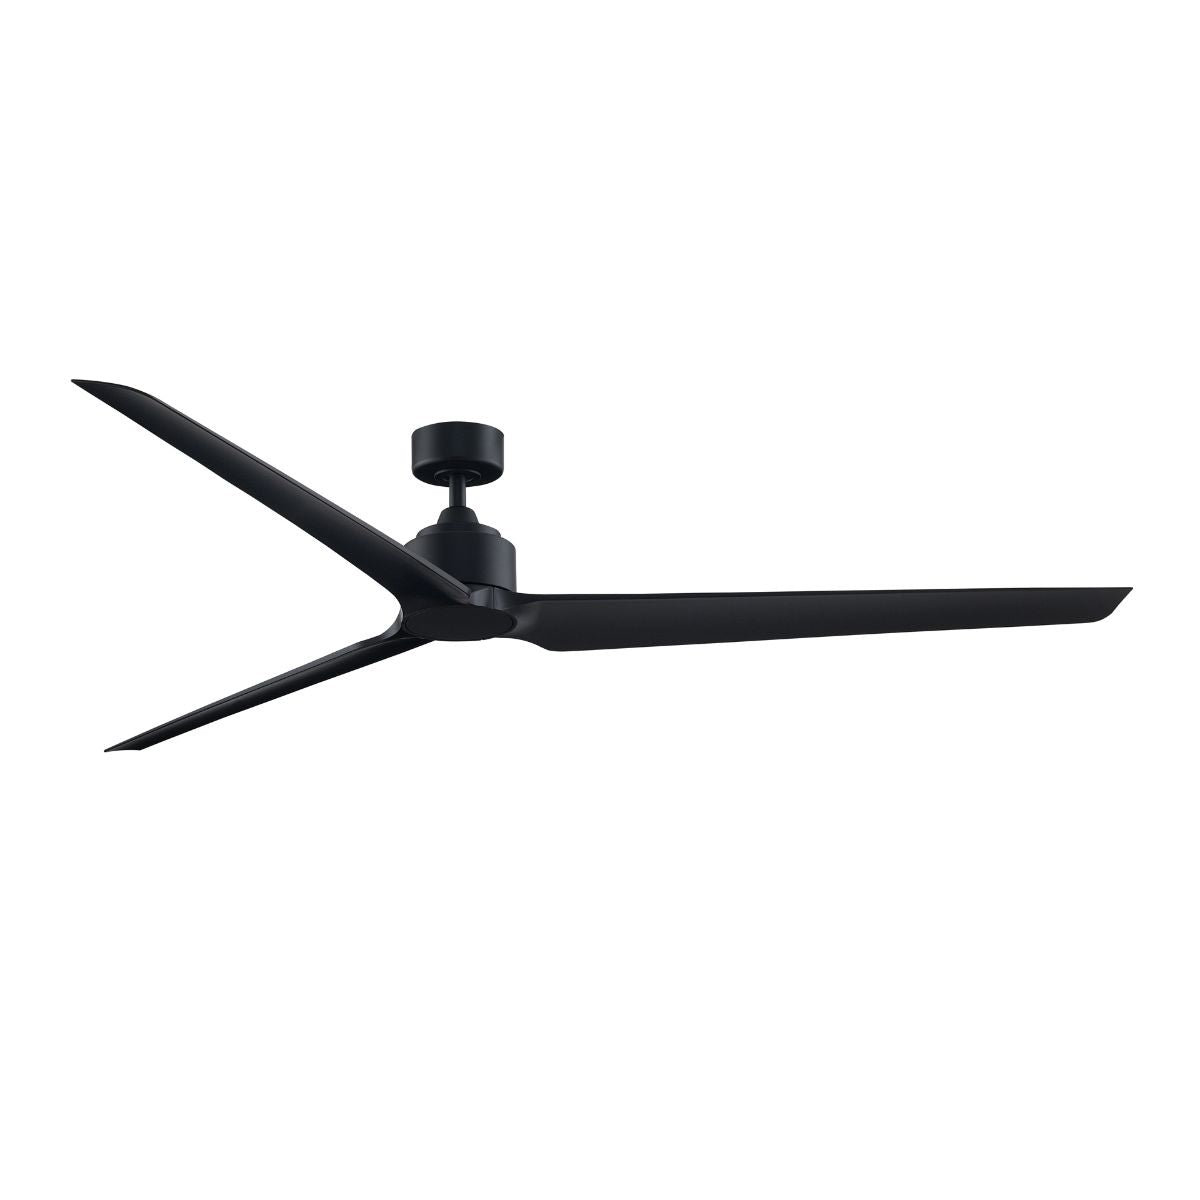 TriAire Custom Outdoor Ceiling Fan Motor With Remote, Set of 3 Blades (64 - 84 Inch) Sold Separately - Bees Lighting